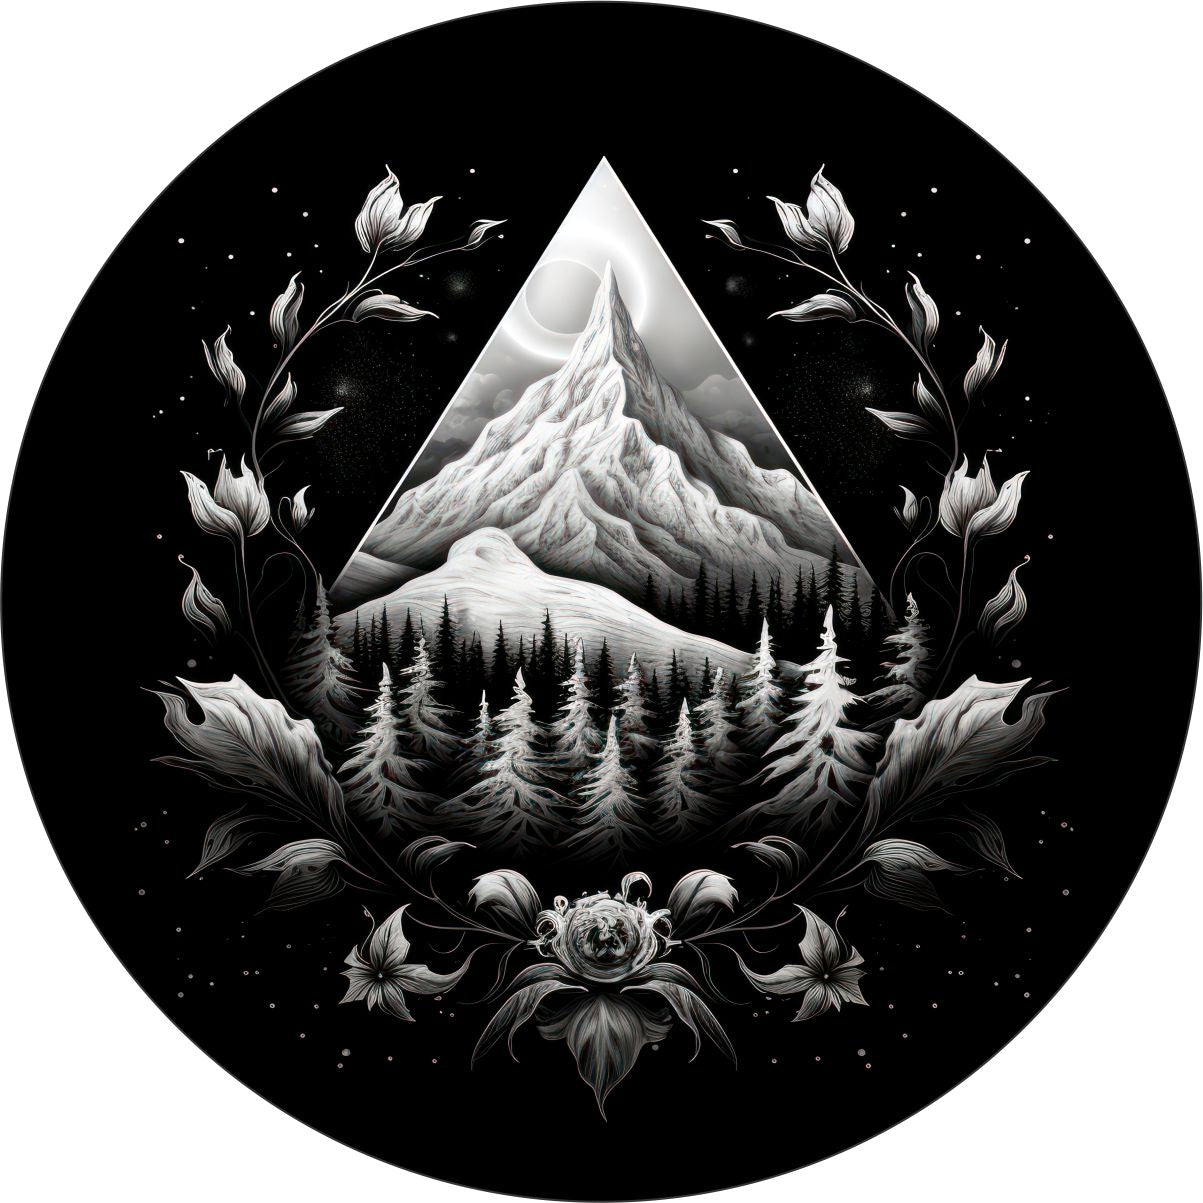 Pretty gray shaded artistic spare tire cover design with mountains and florals. The unique shading shows depth and artistry to this graphic design.